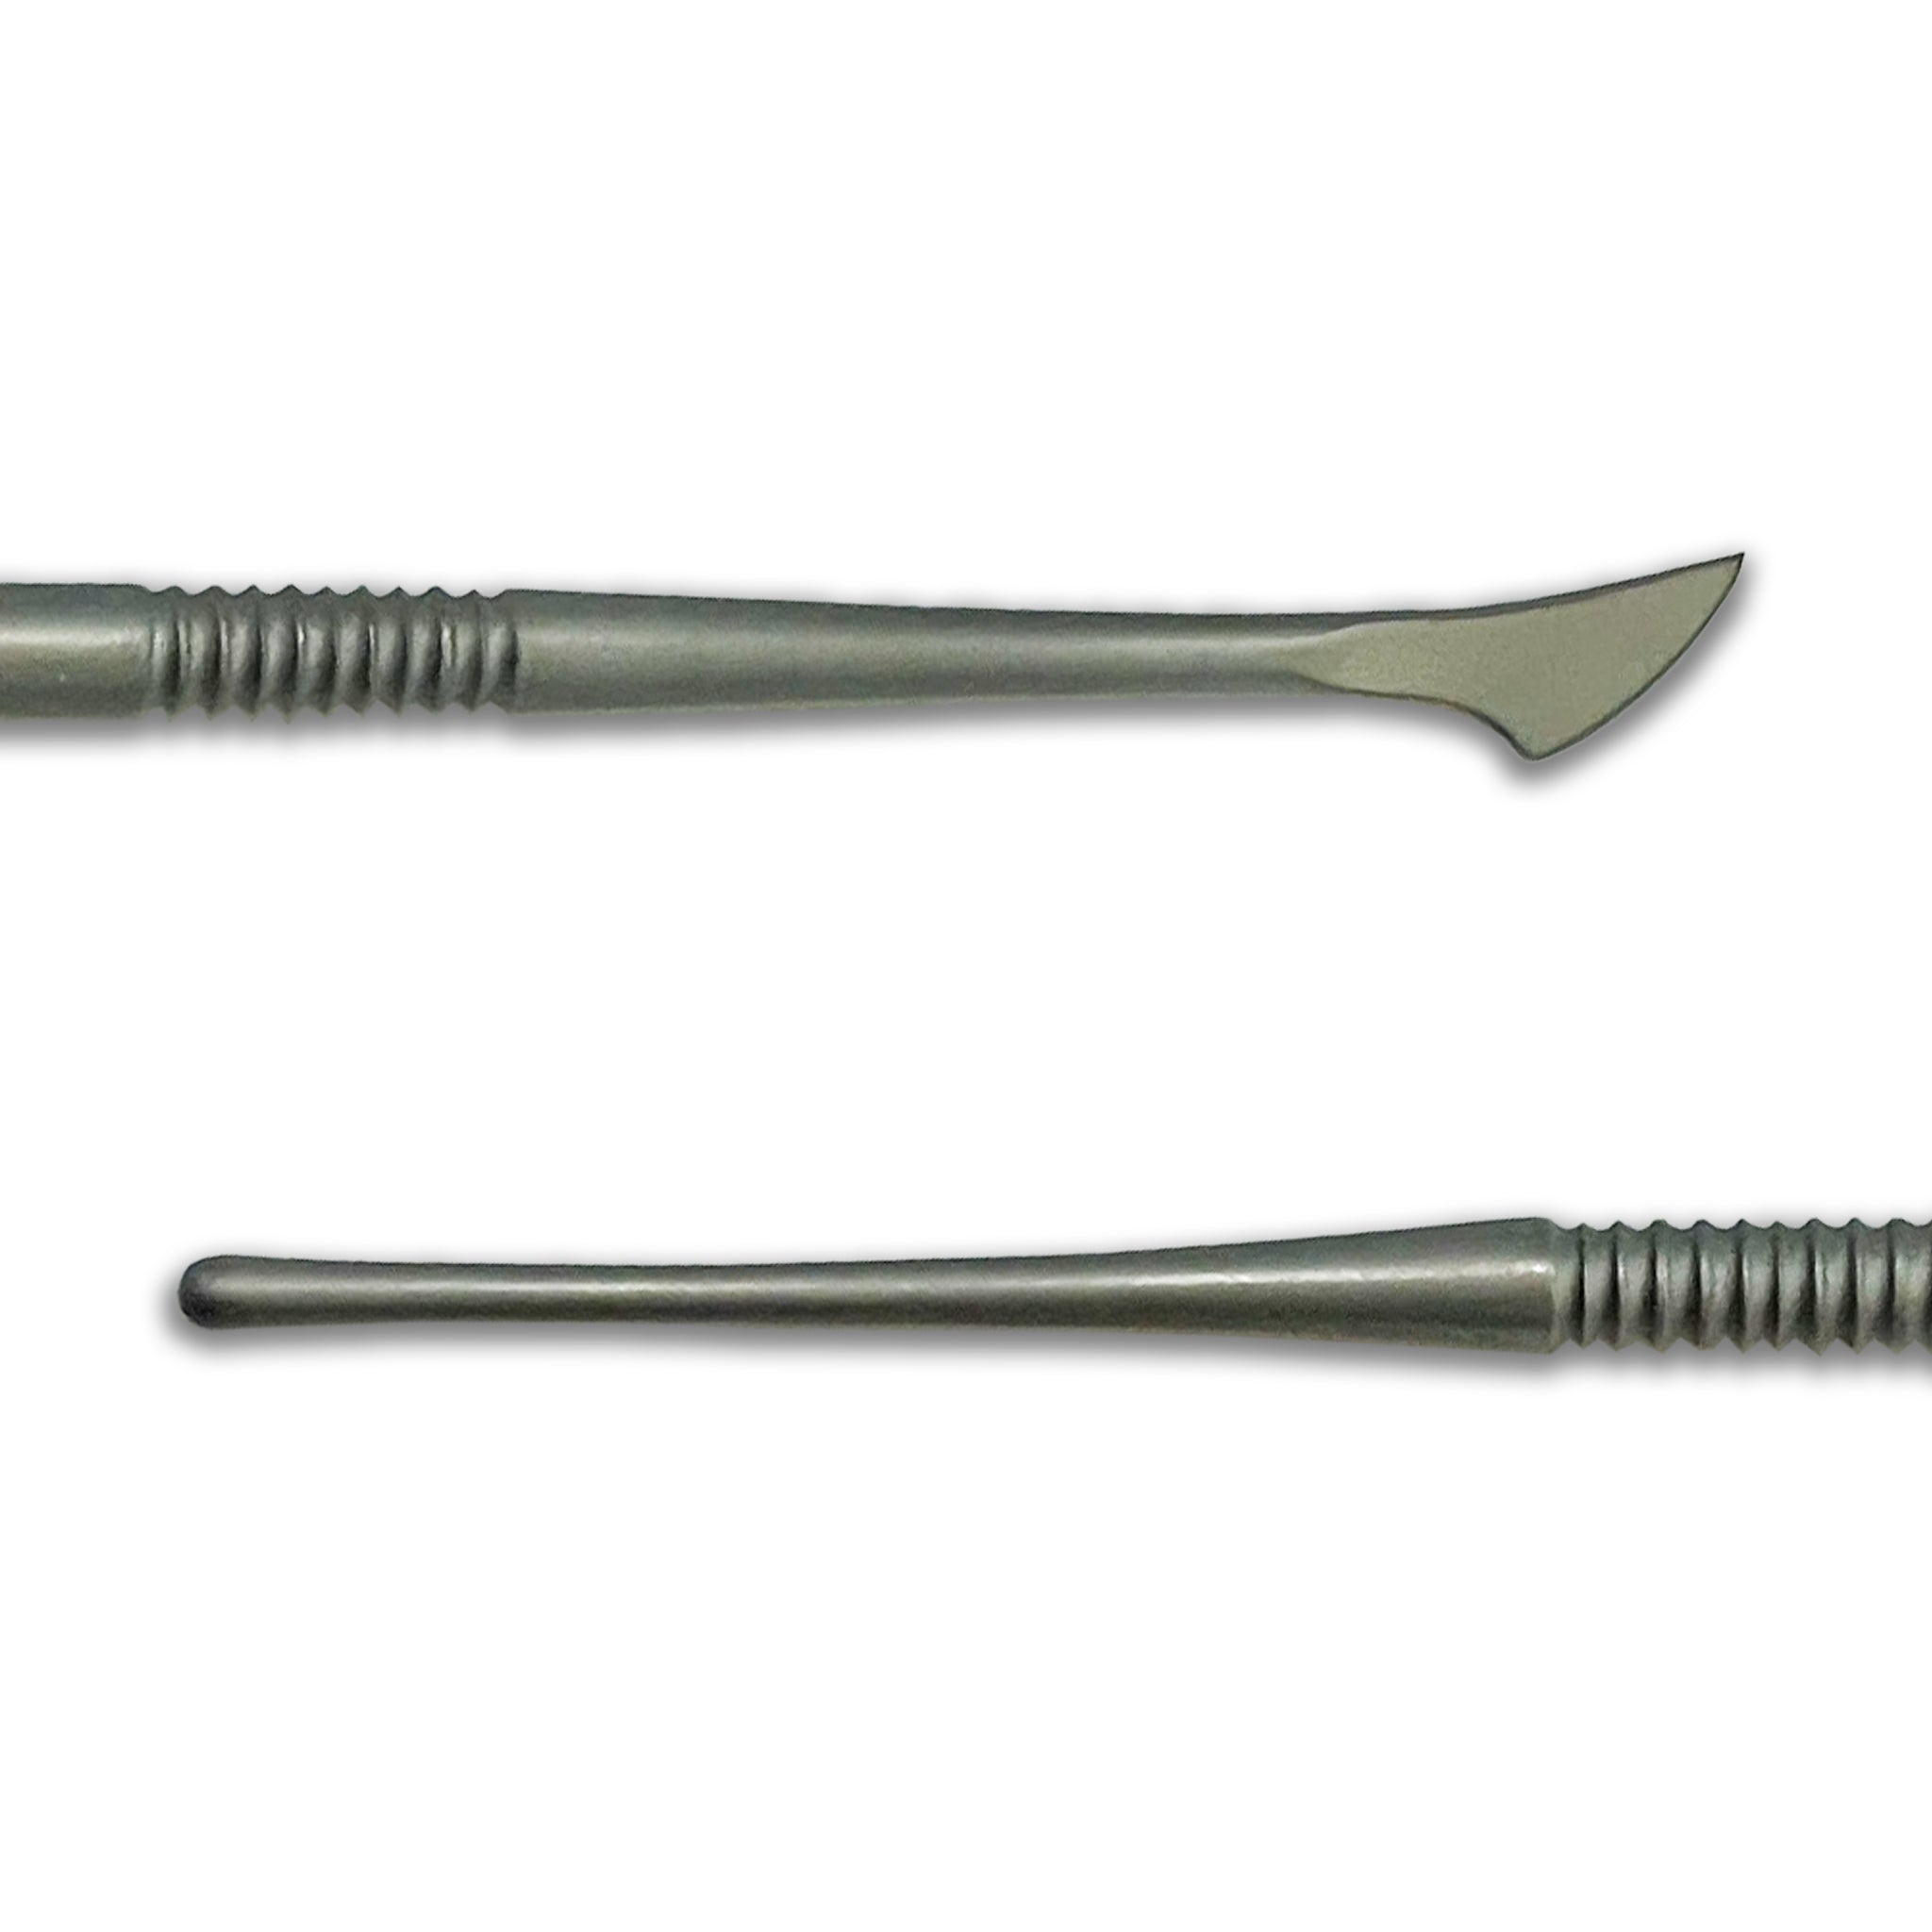 Stainless Steel Wax Tool 15cm EIC908